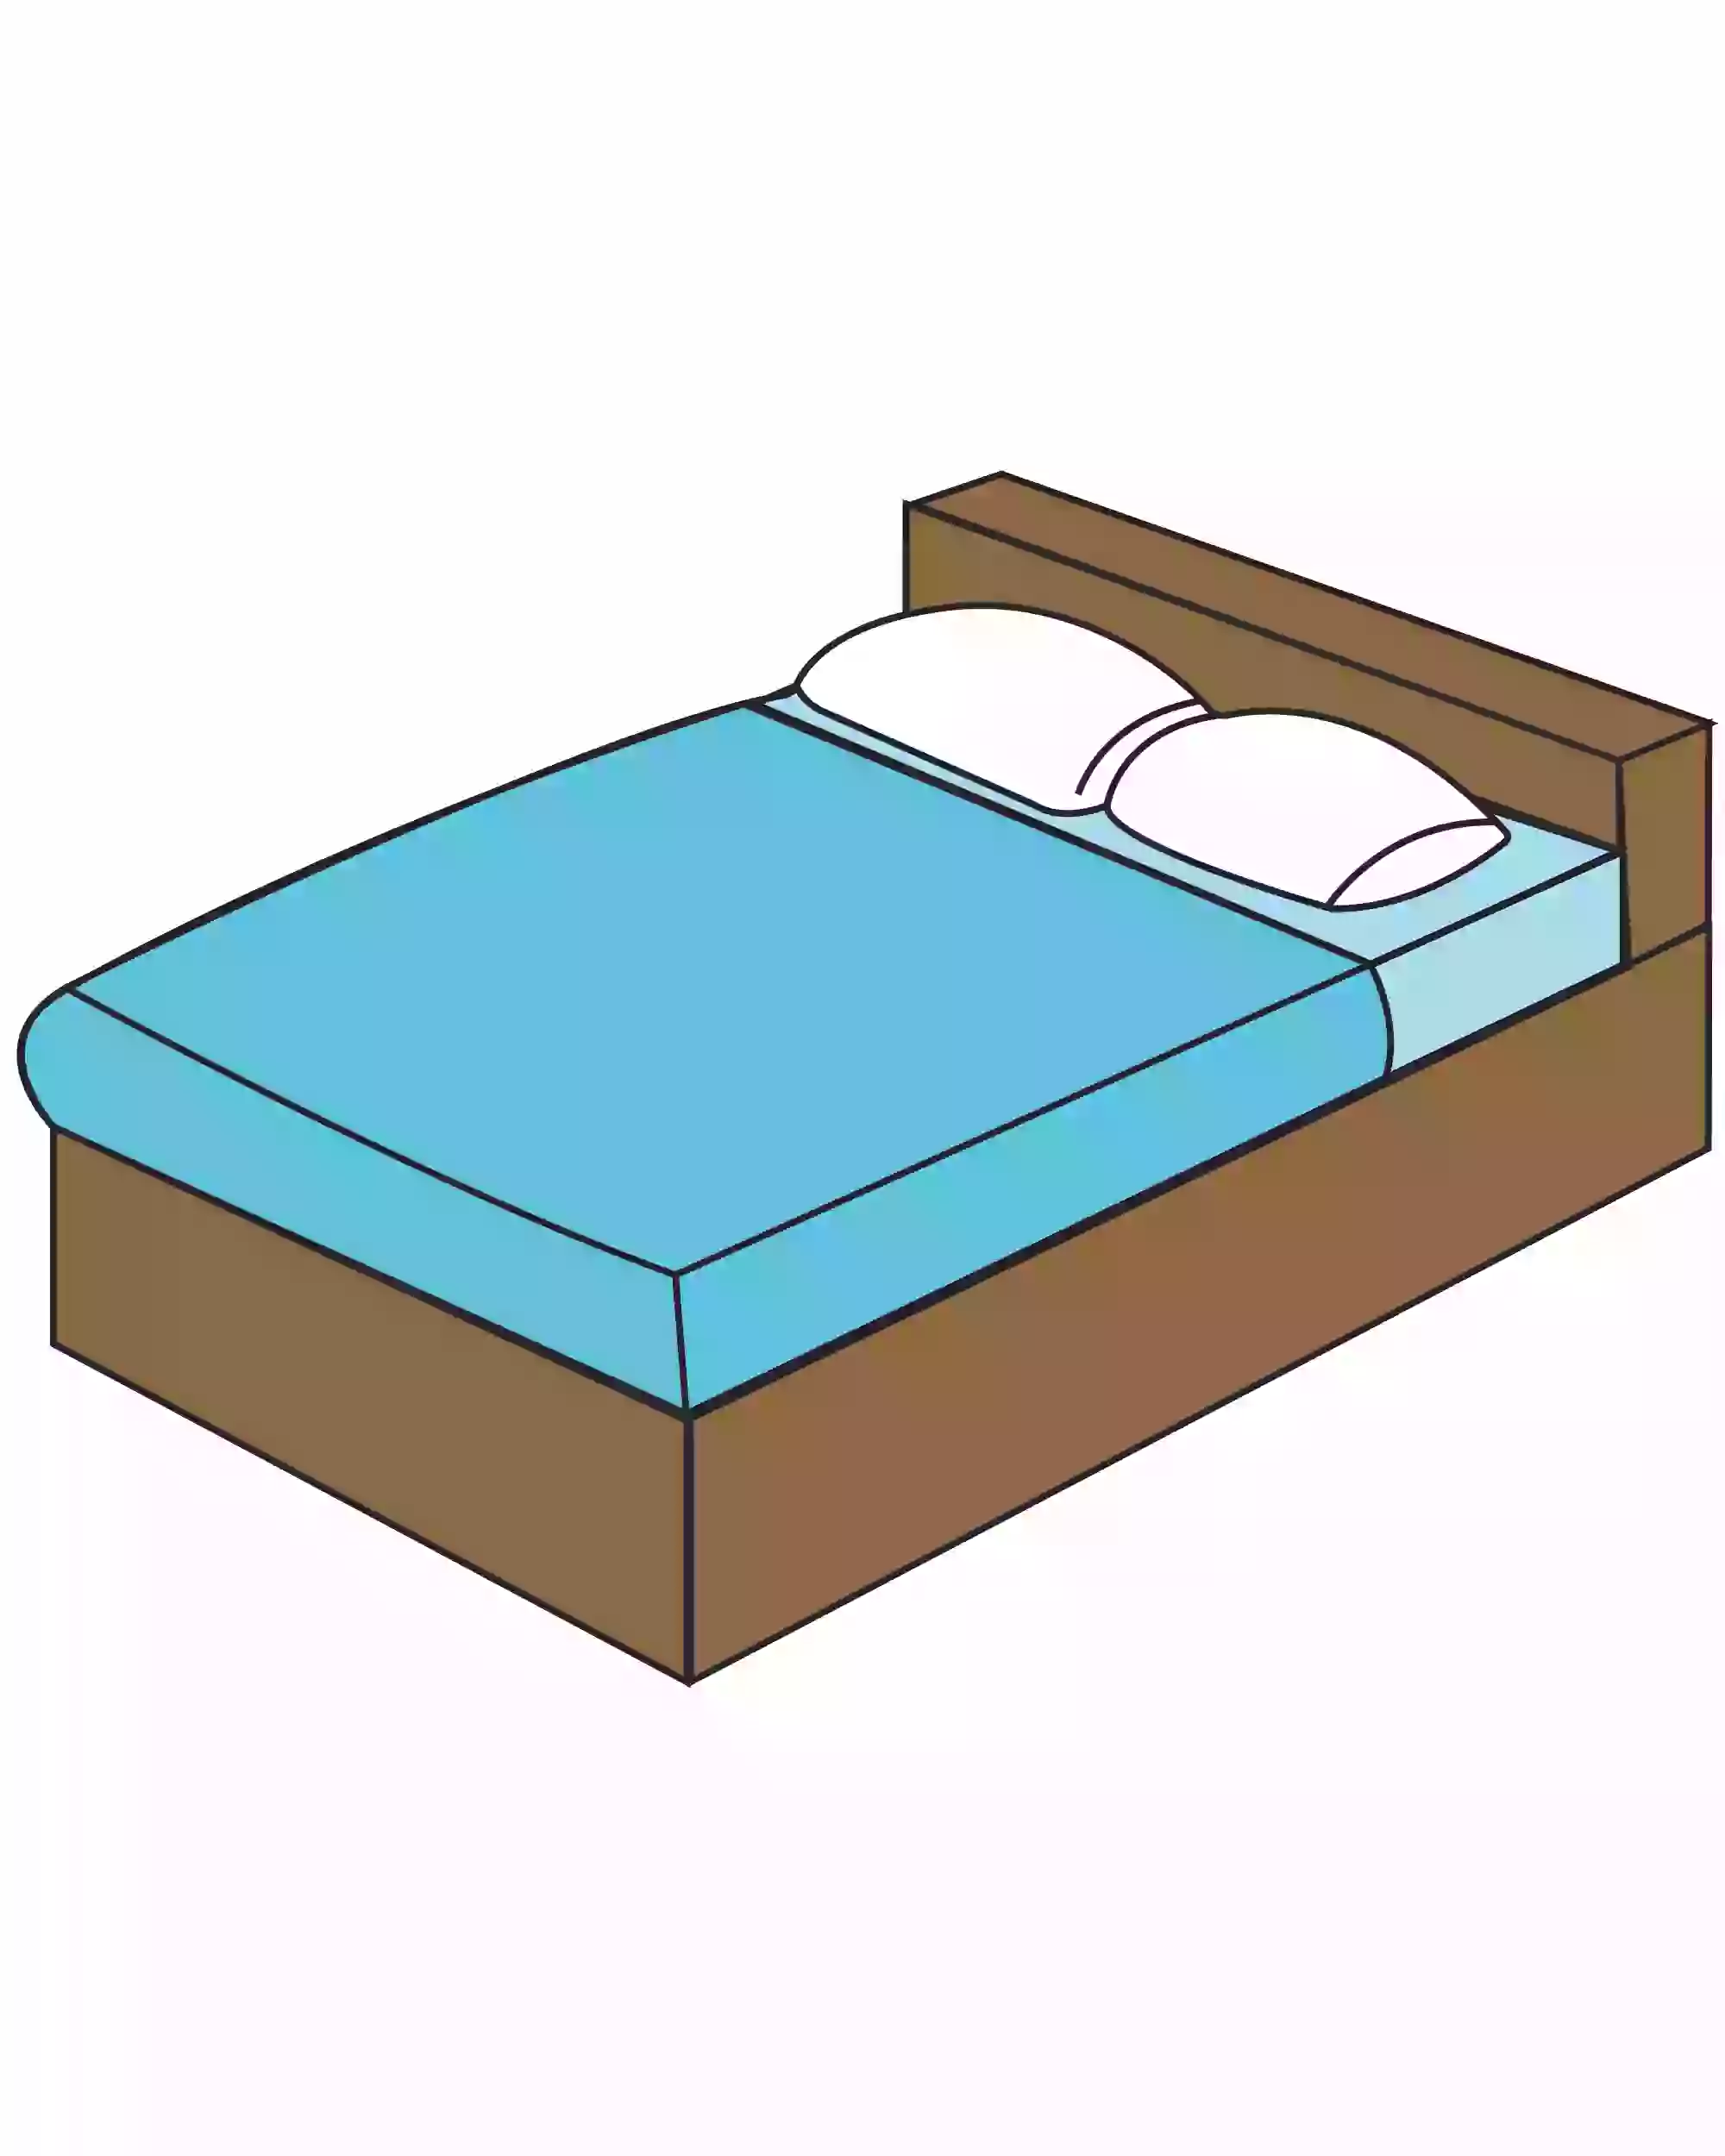 25 Easy Bed Drawing Ideas  How to Draw a Bed